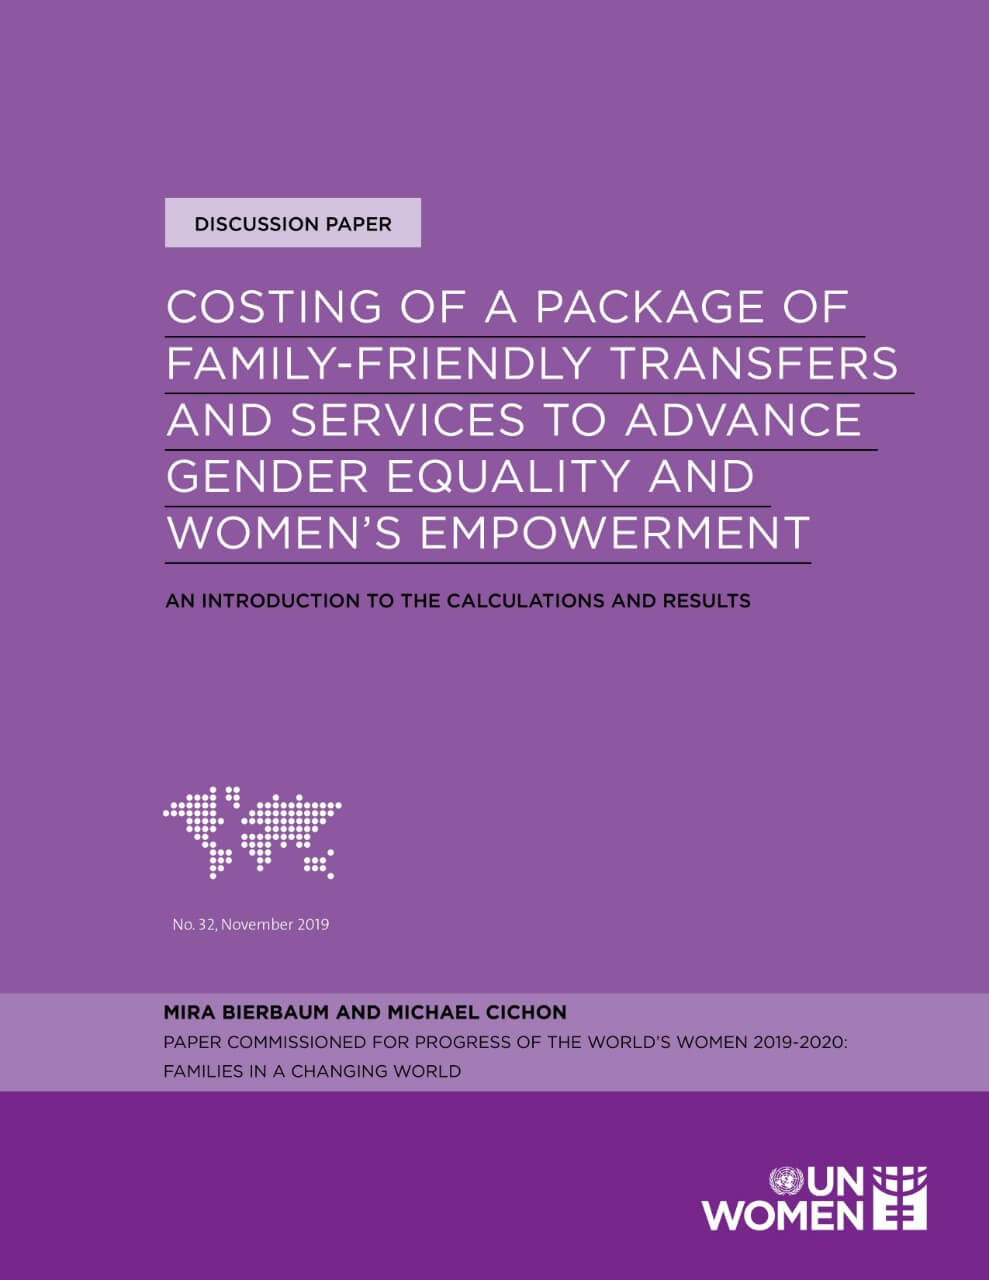 Costing of a package of family-friendly transfers and services to advance gender equality and women’s empowerment: An introduction to the calculations and results